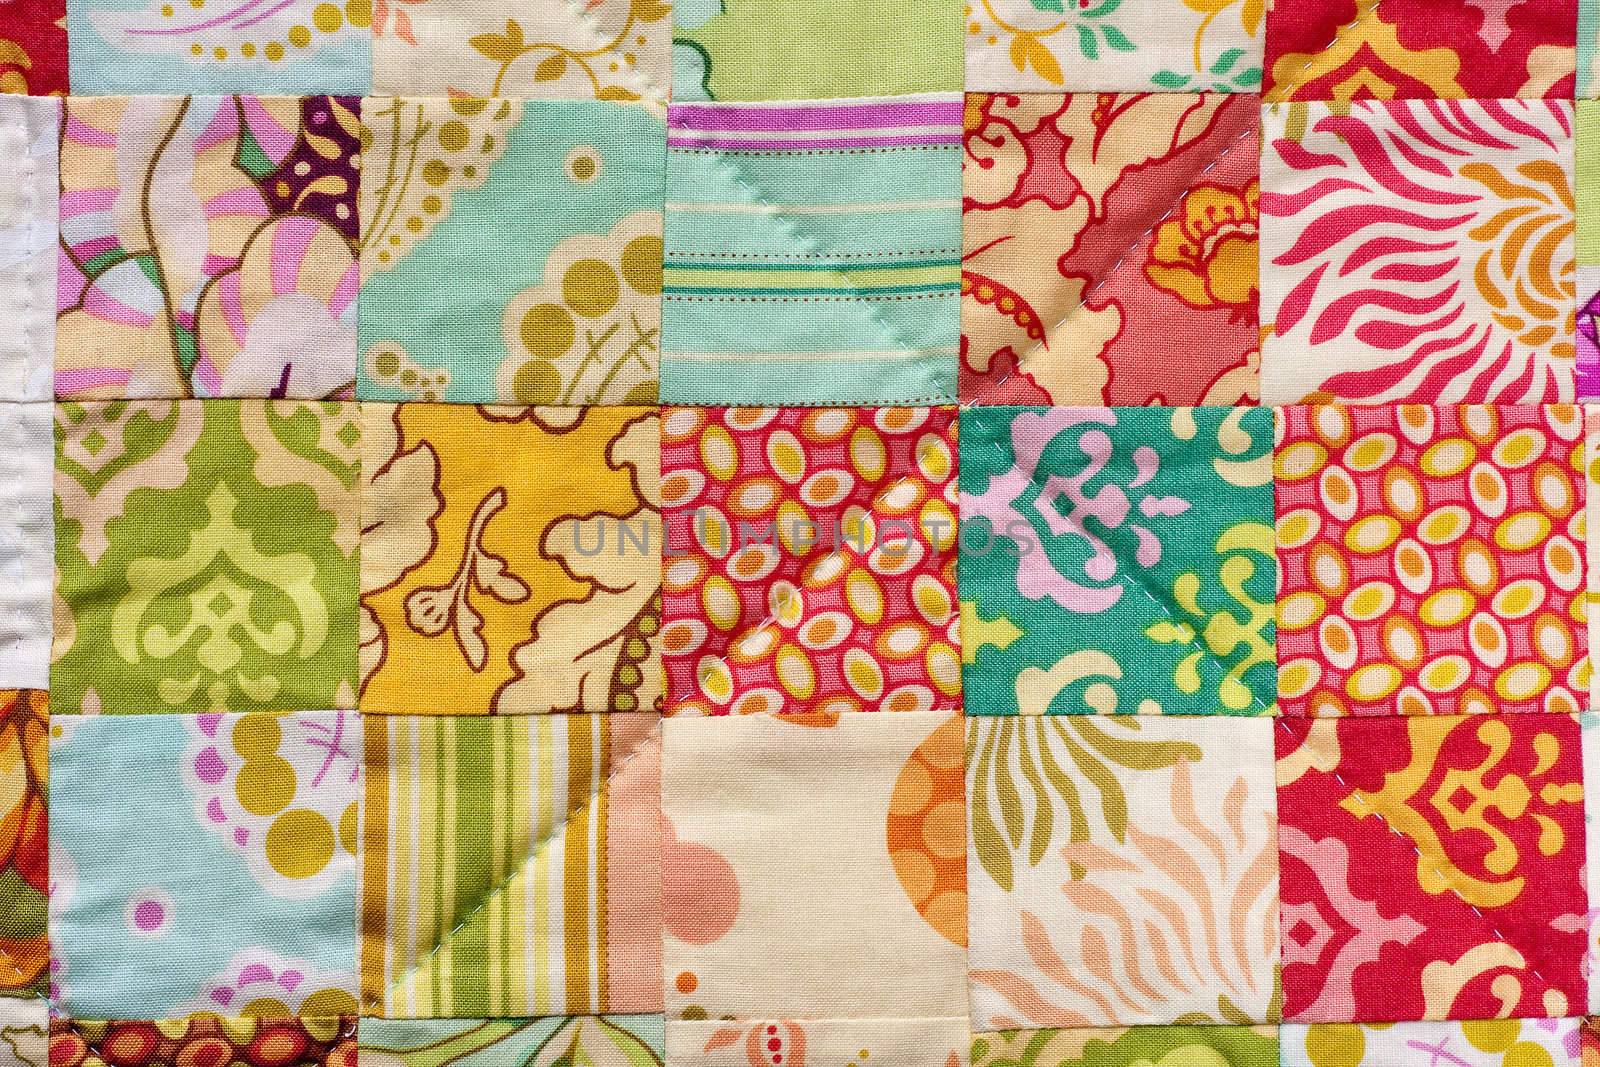 Detail from a handmade patchwork quilt made with squares.